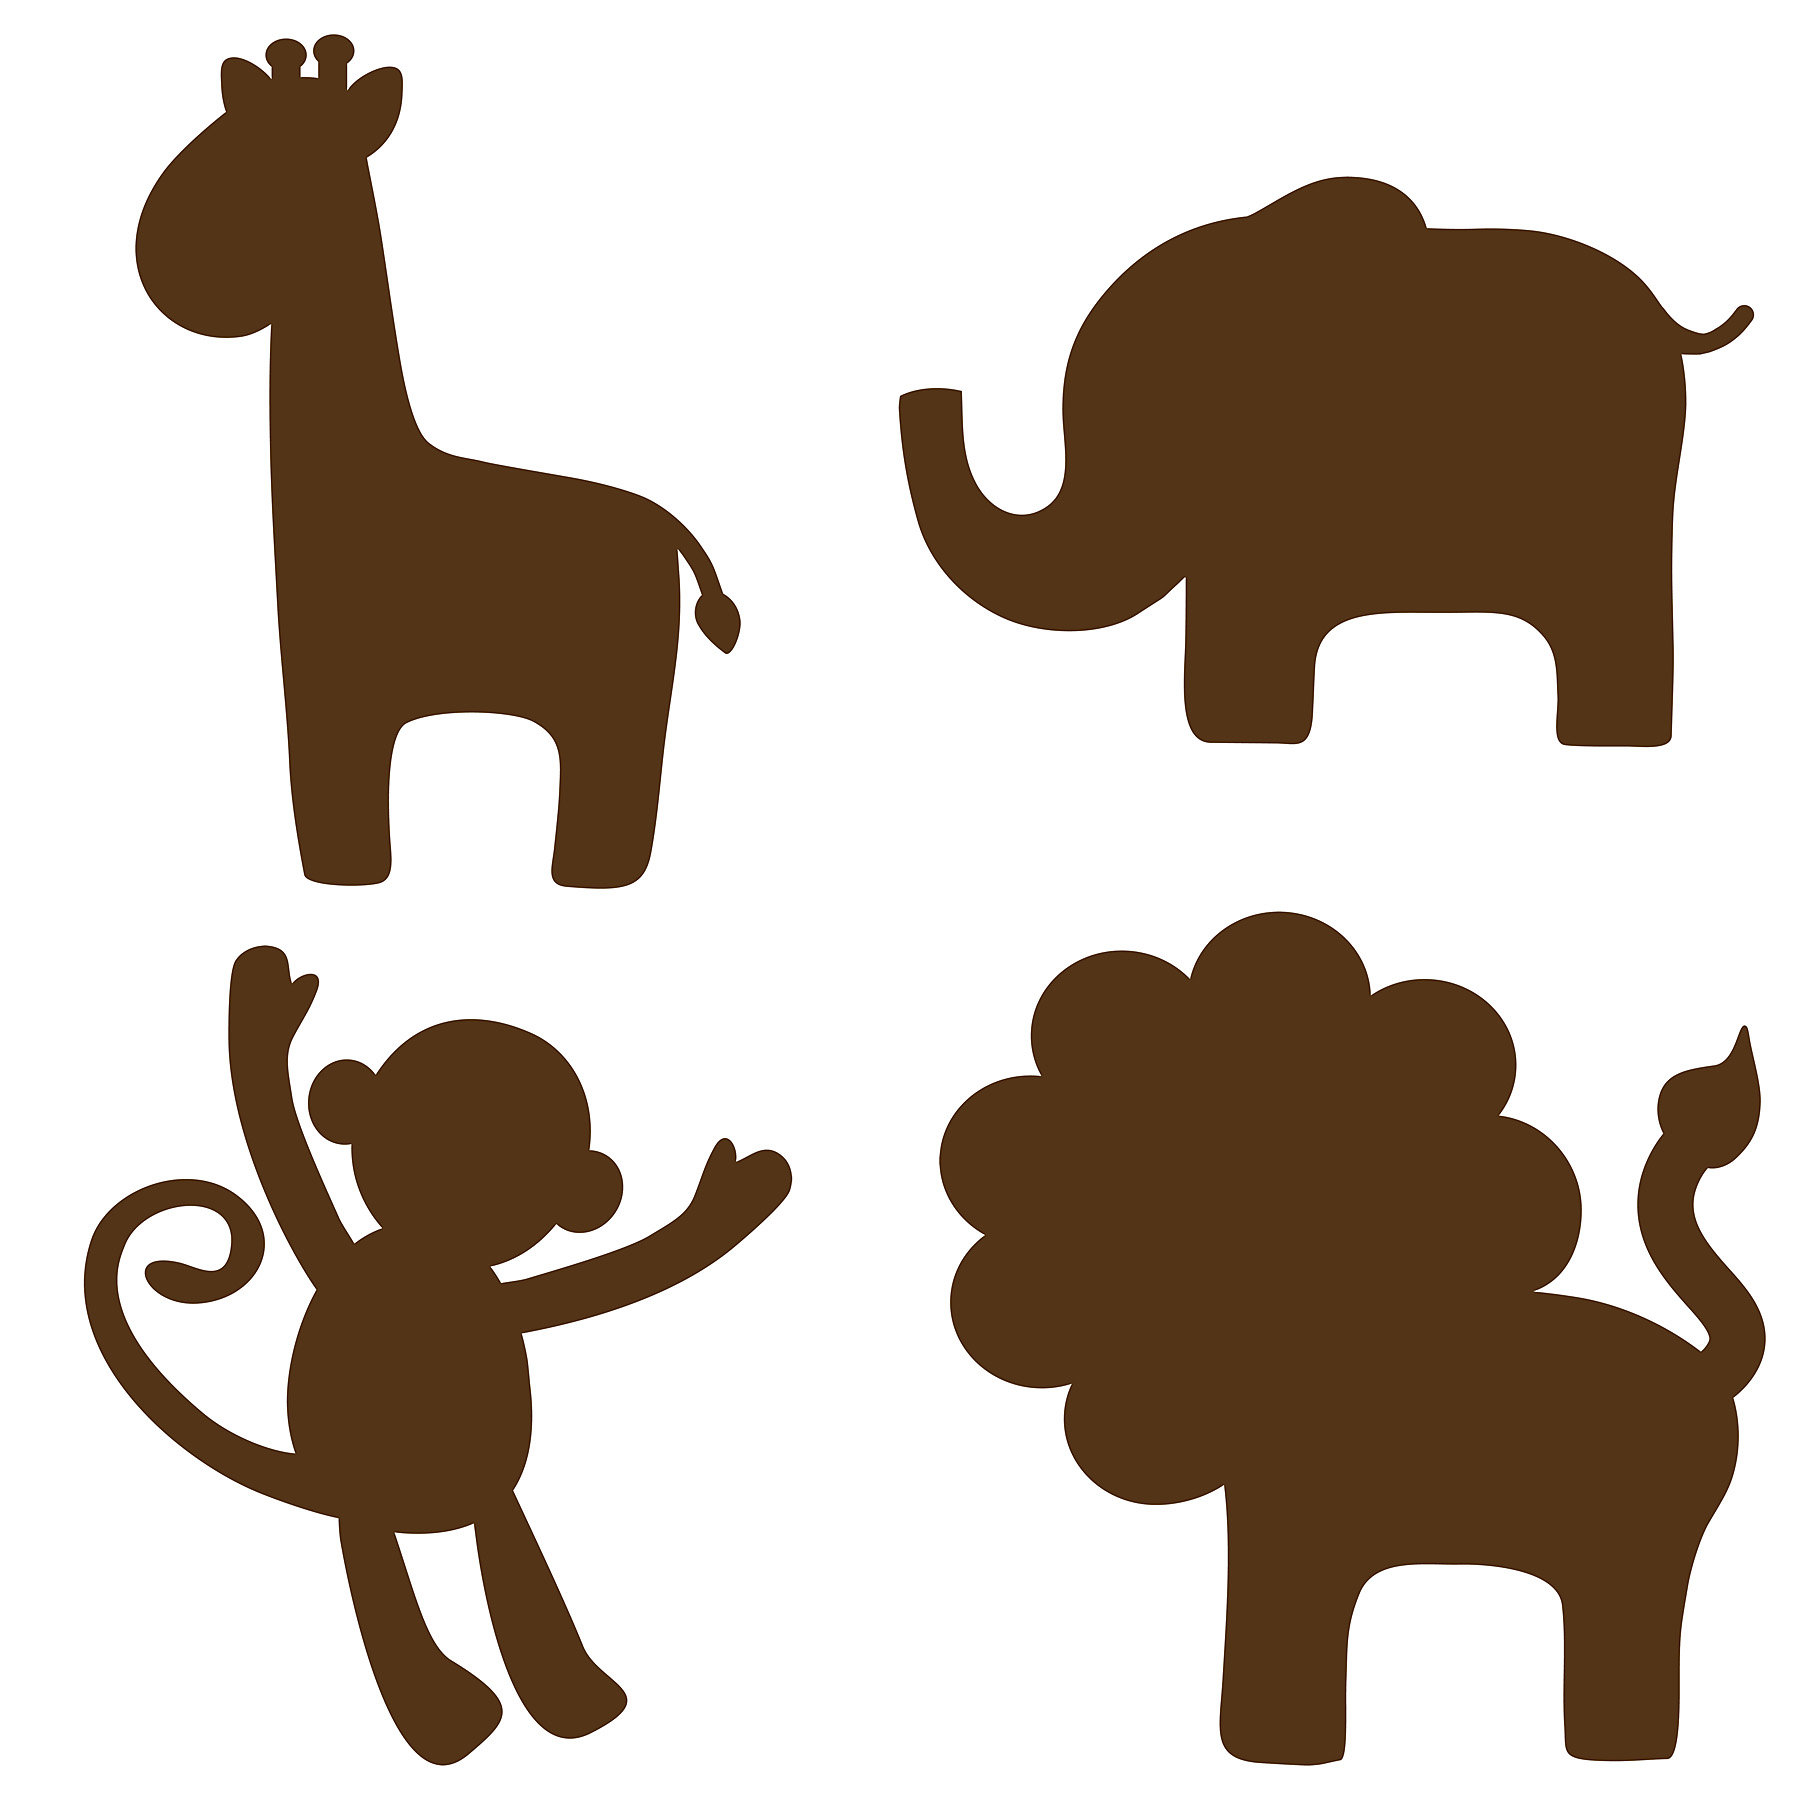 Giraffe Silhouette Illustration Of A Clipart - Free Clip Art Images